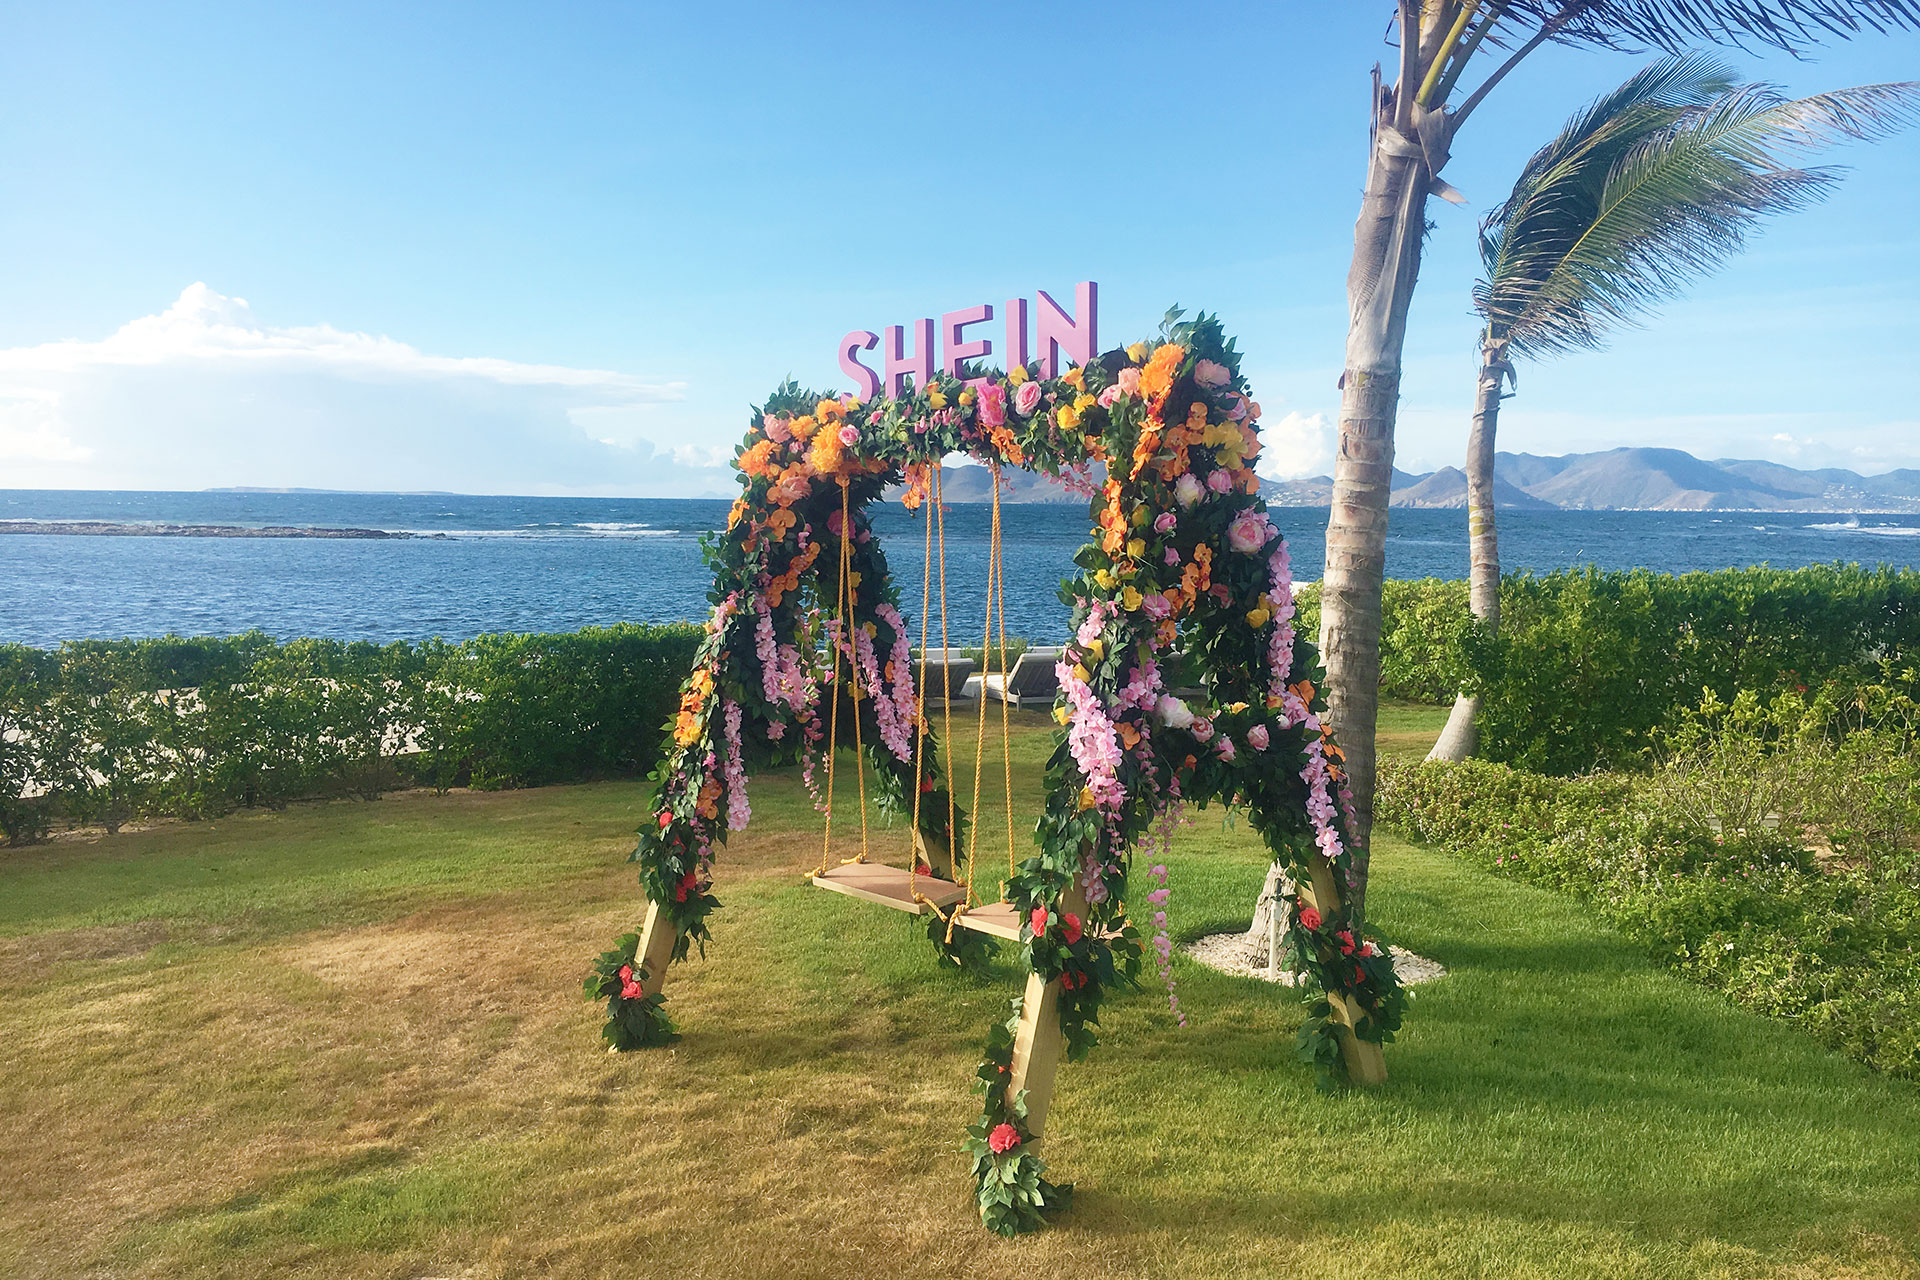 Floral Swingset Seaside on theSHEIN Influencer trip